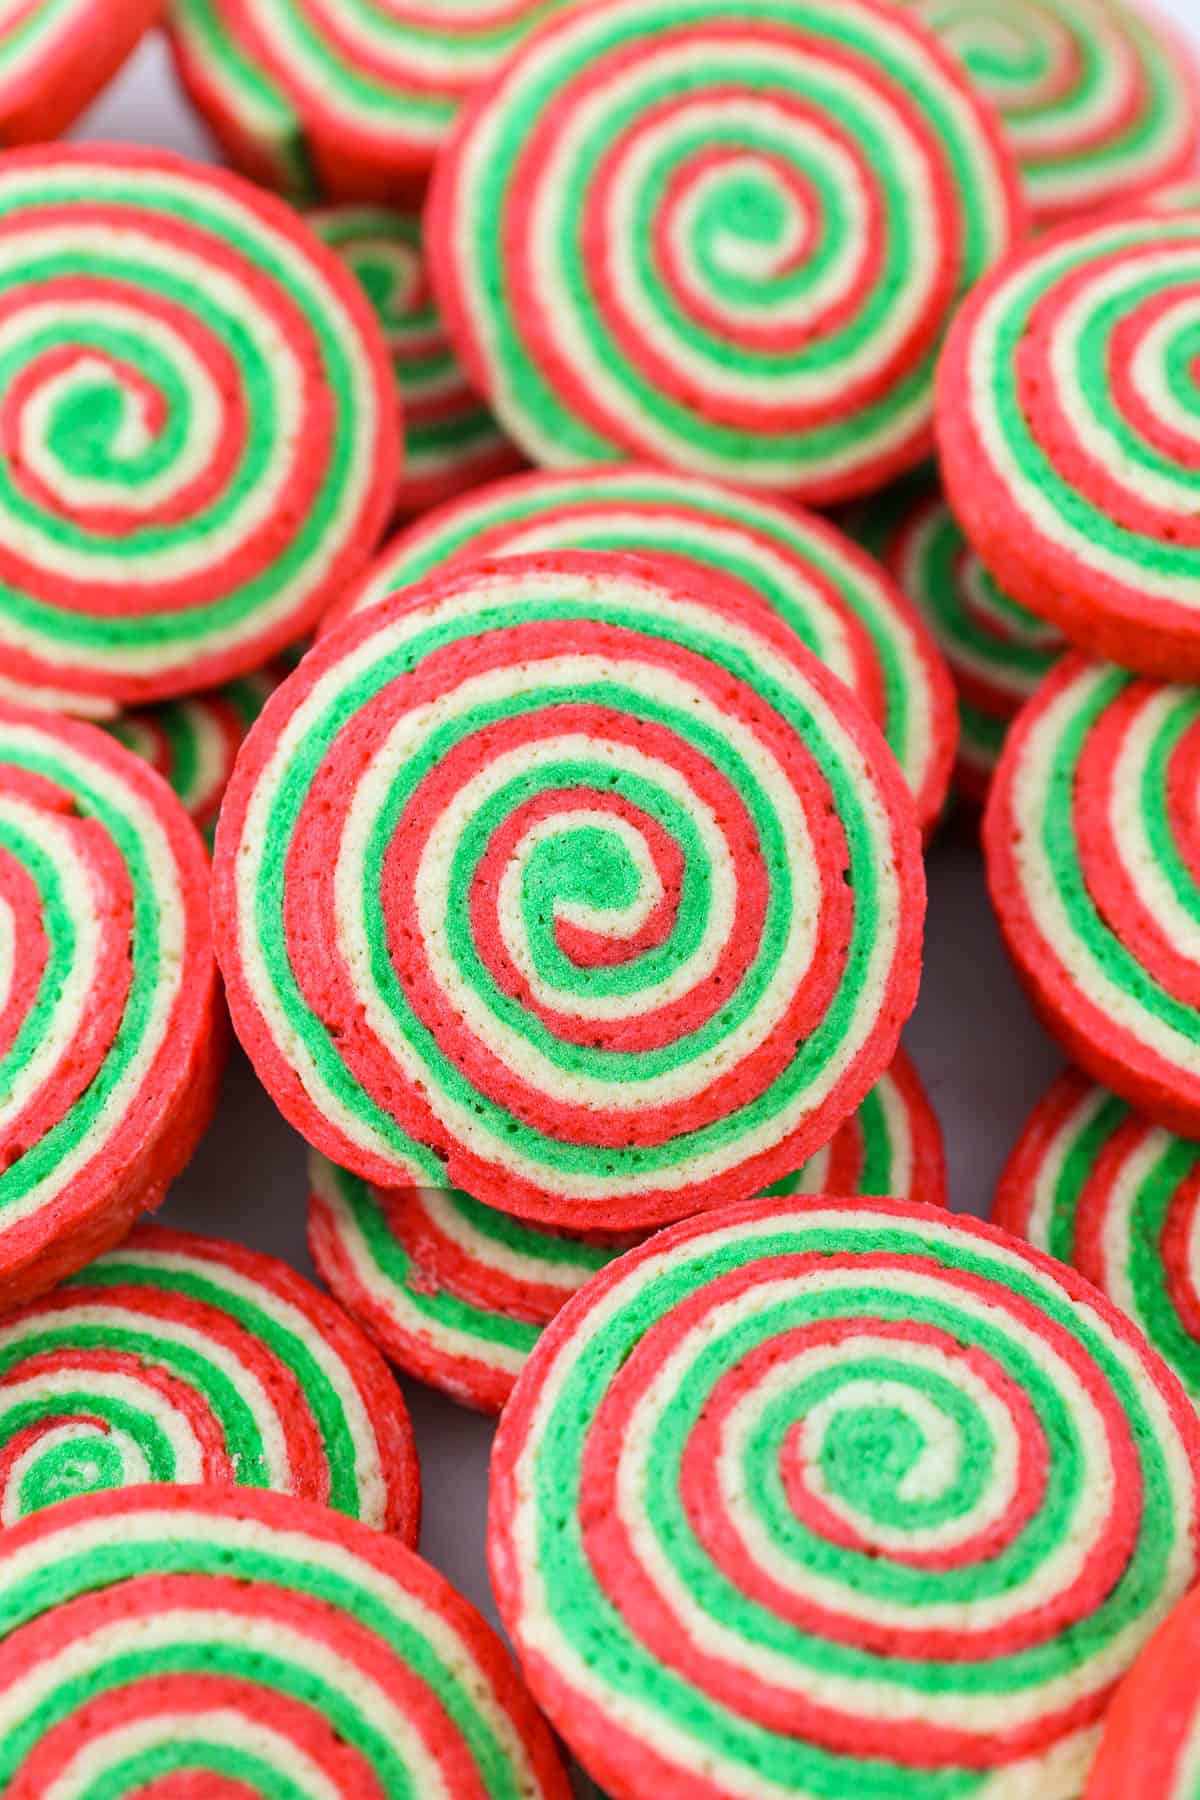 Assorted red and green baked Christmas pinwheel cookies.